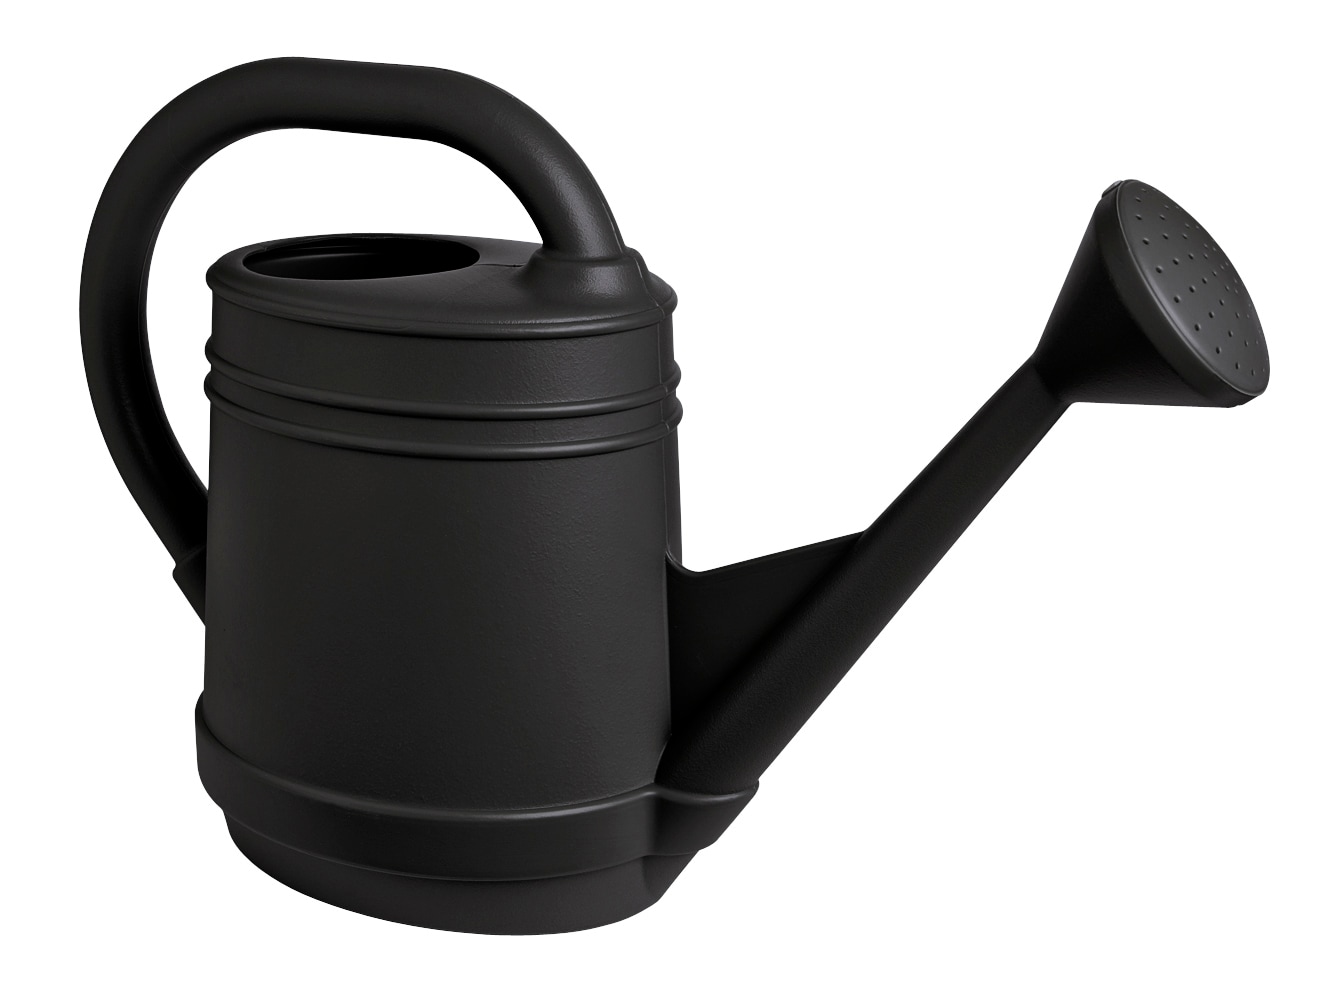 Details about   2-Gallon Slate Resin Traditional Designed Light Weight Garden Watering Can Pot 